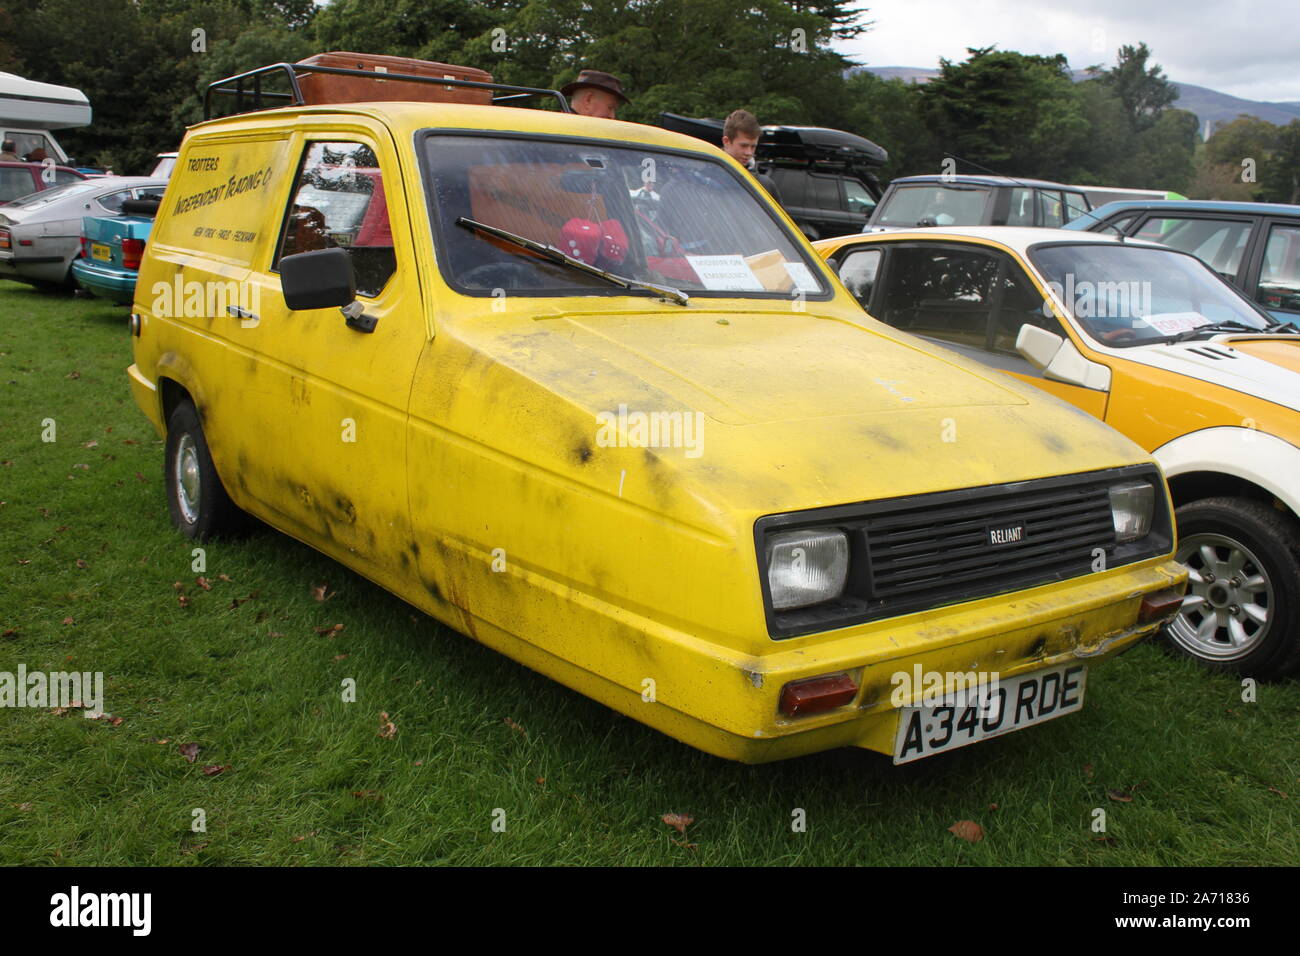 A Robin Reliant car as seen in Only Fools and Horses seen at Kilbroney Vintage Show 2019 Stock Photo